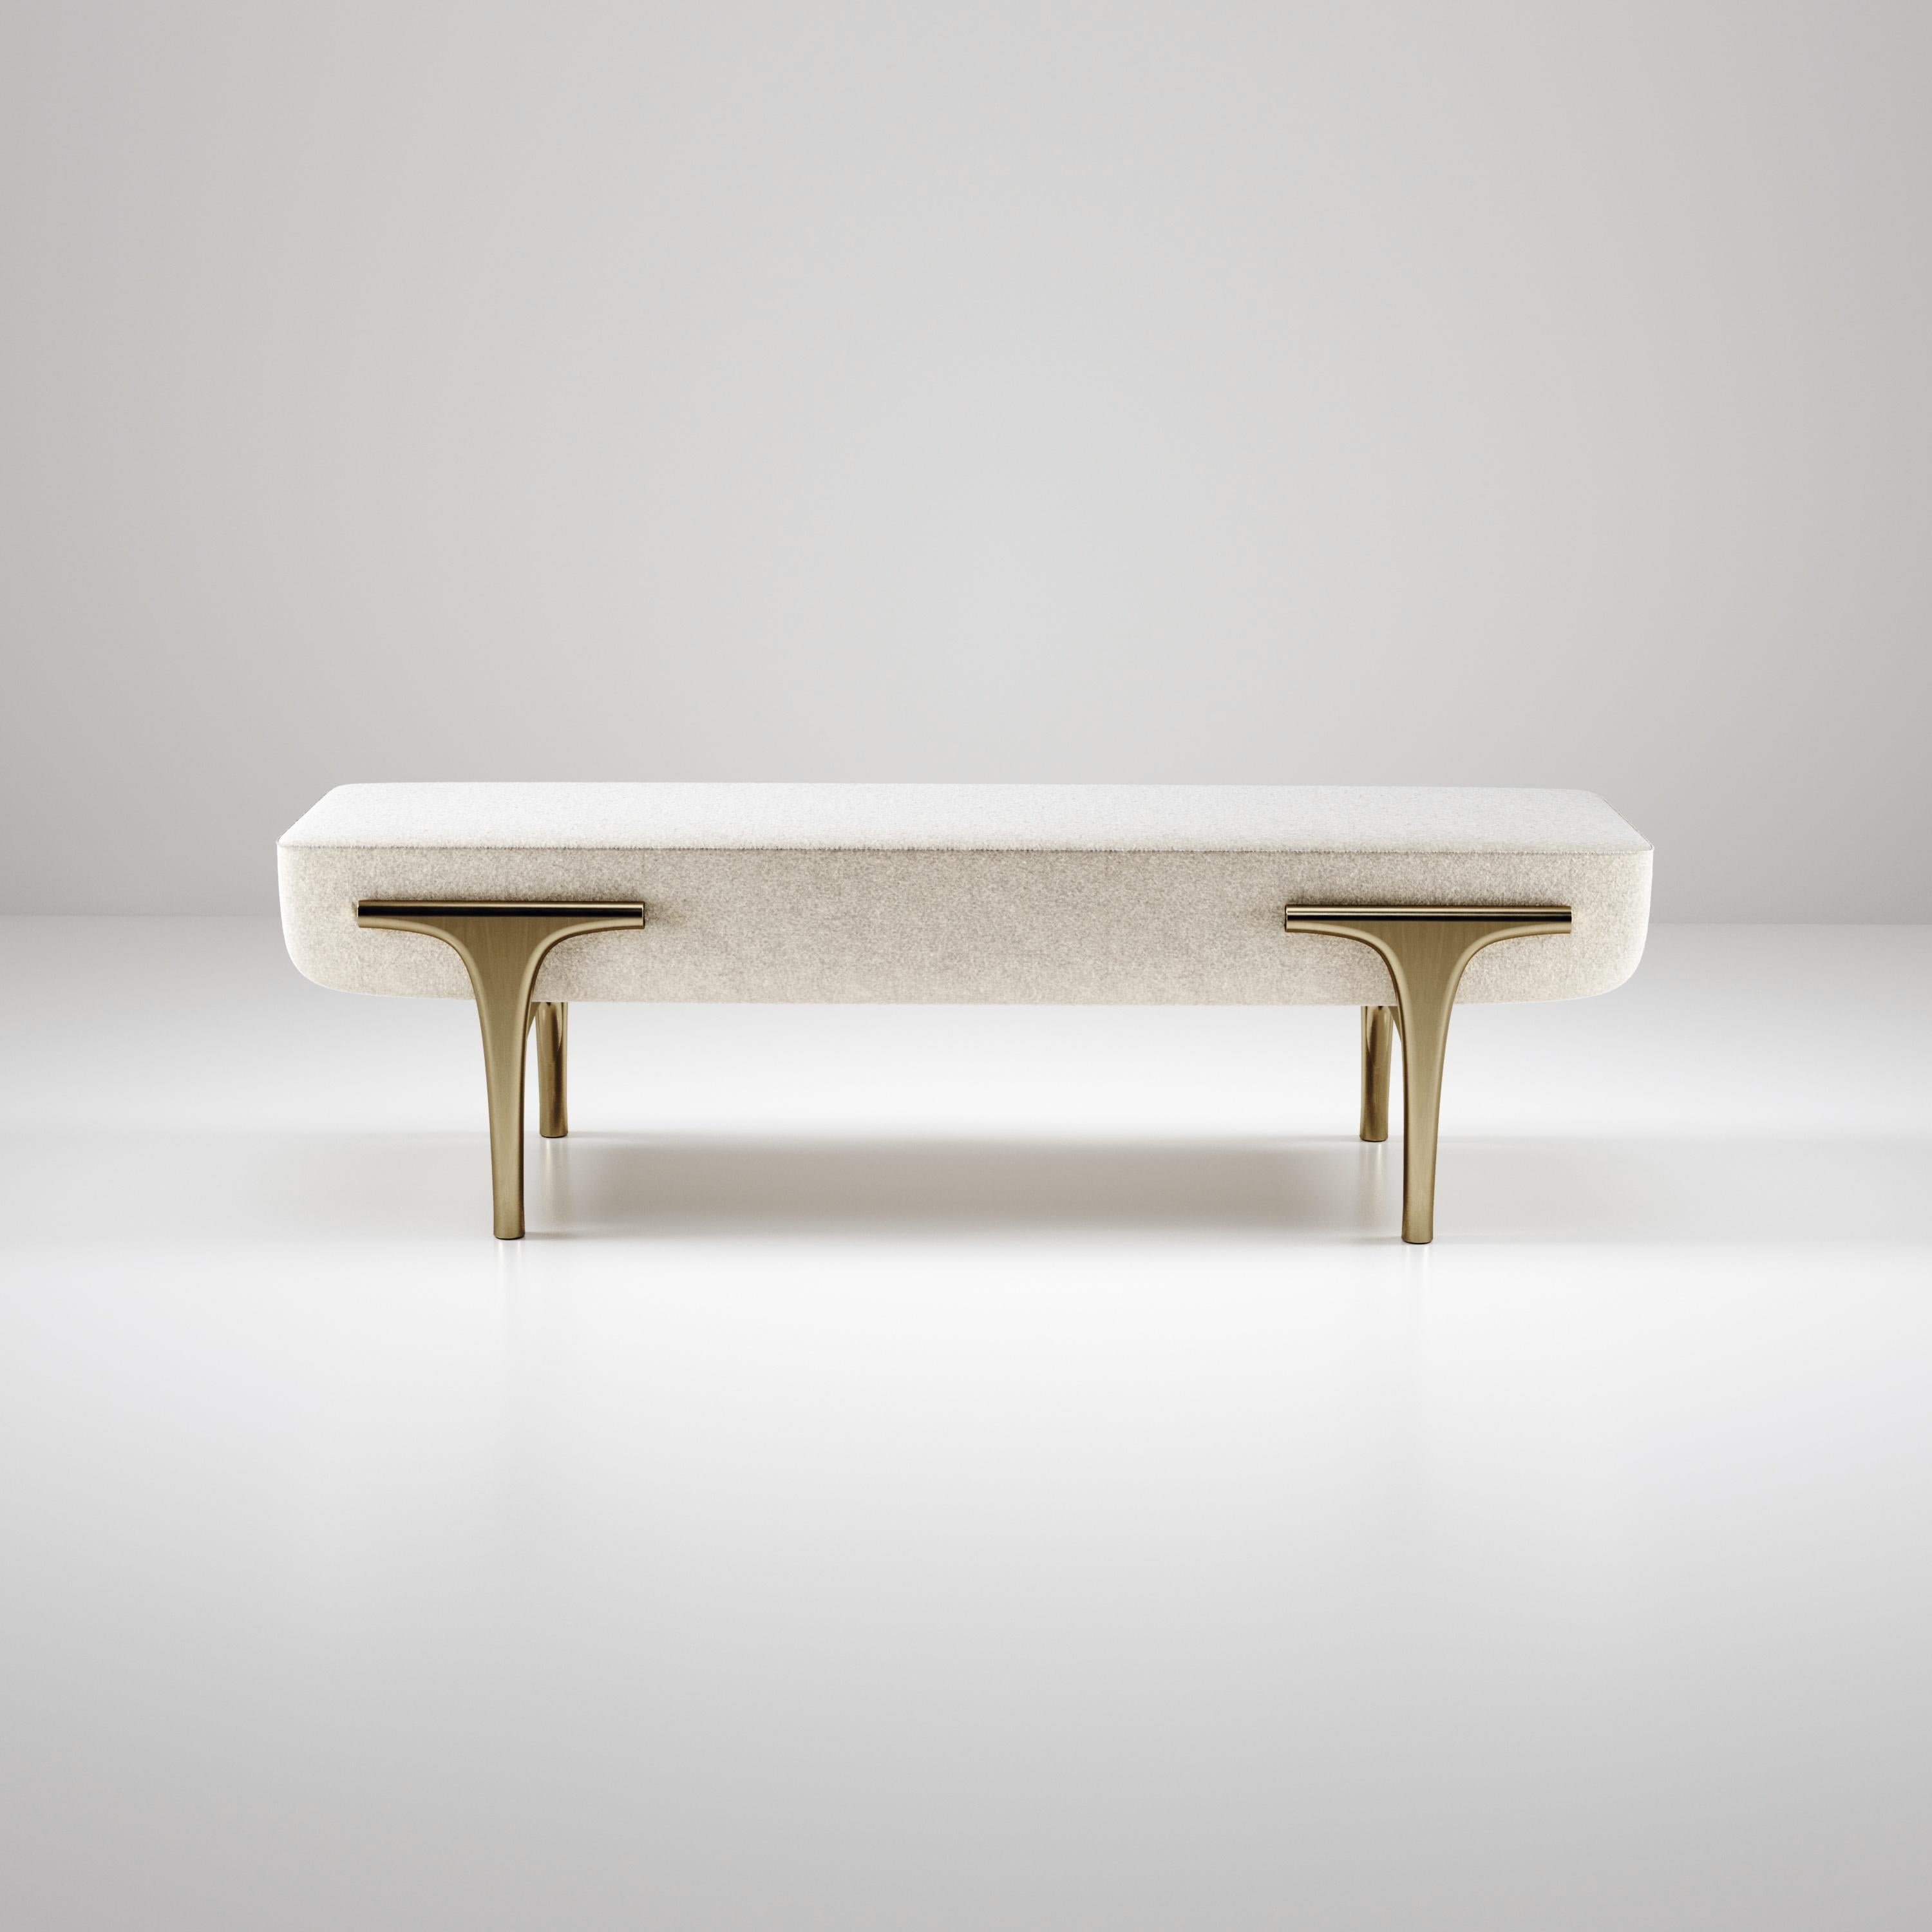 The Ramo bench by R & Y Augousti is an elegant and versatile piece. The upholstered piece provides comfort while retaining a unique aesthetic with the bronze-patina brass frame and details. This listing is priced for COM supply by client, see other